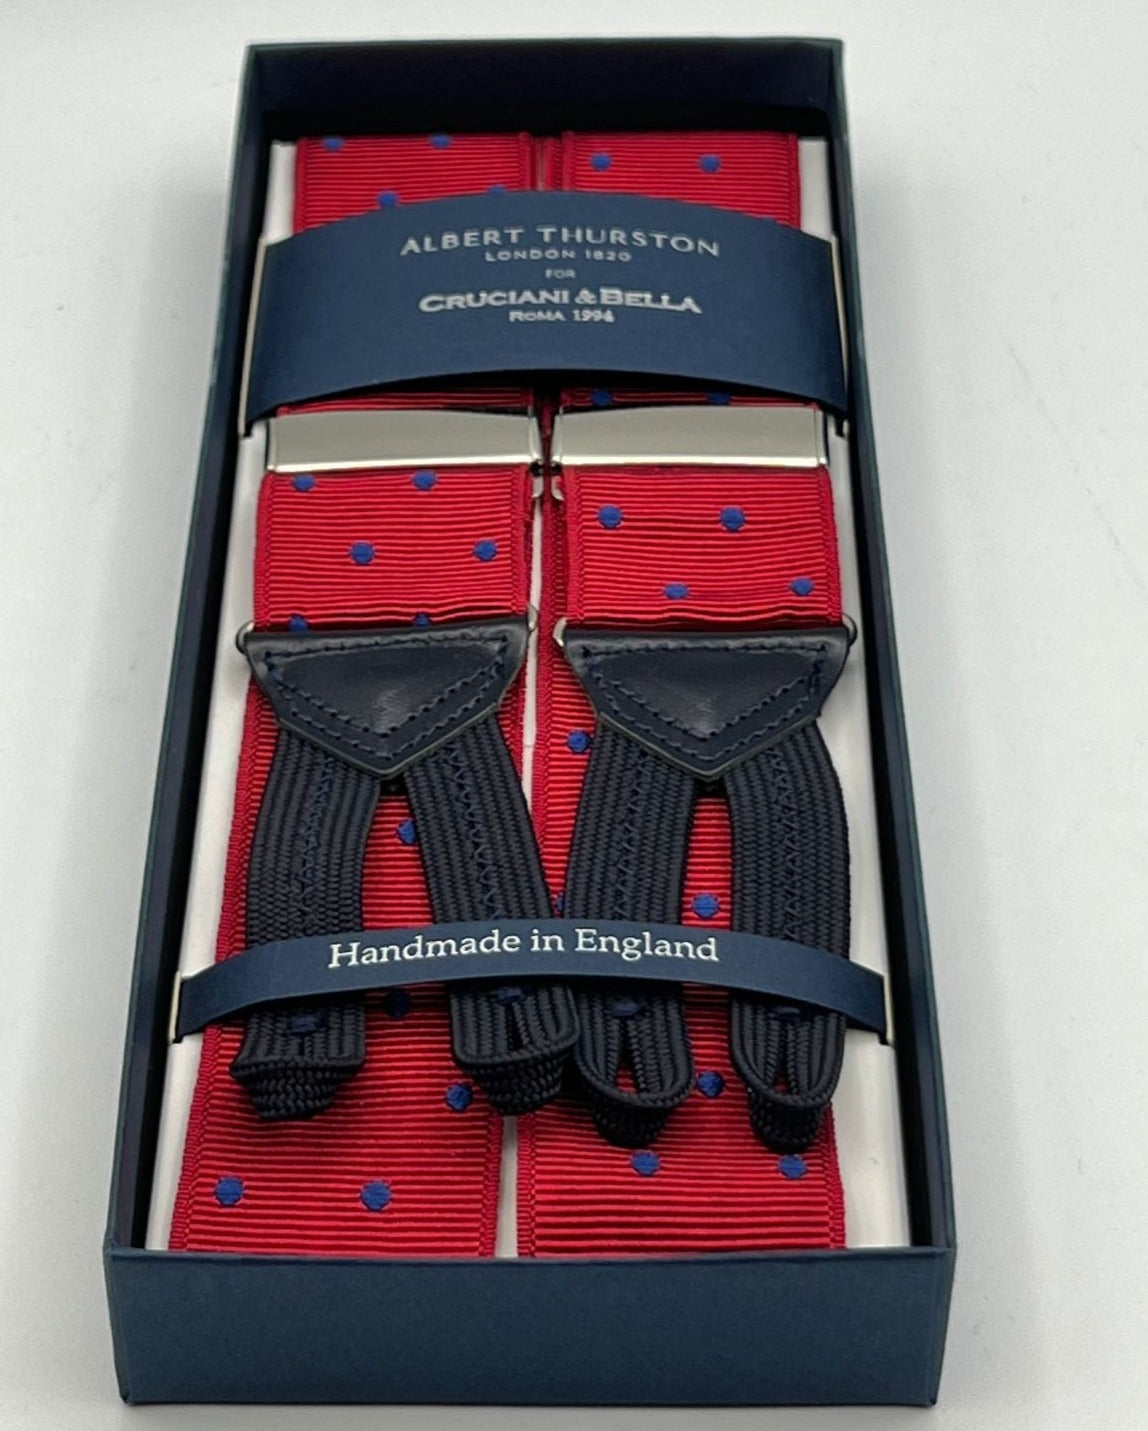 Albert Thurston for Cruciani & Bella Made in England Adjustable Sizing 40 mm Woven Barathea  Red and Blue Dots  Braces Braid ends Y-Shaped Nickel Fittings Size: XL